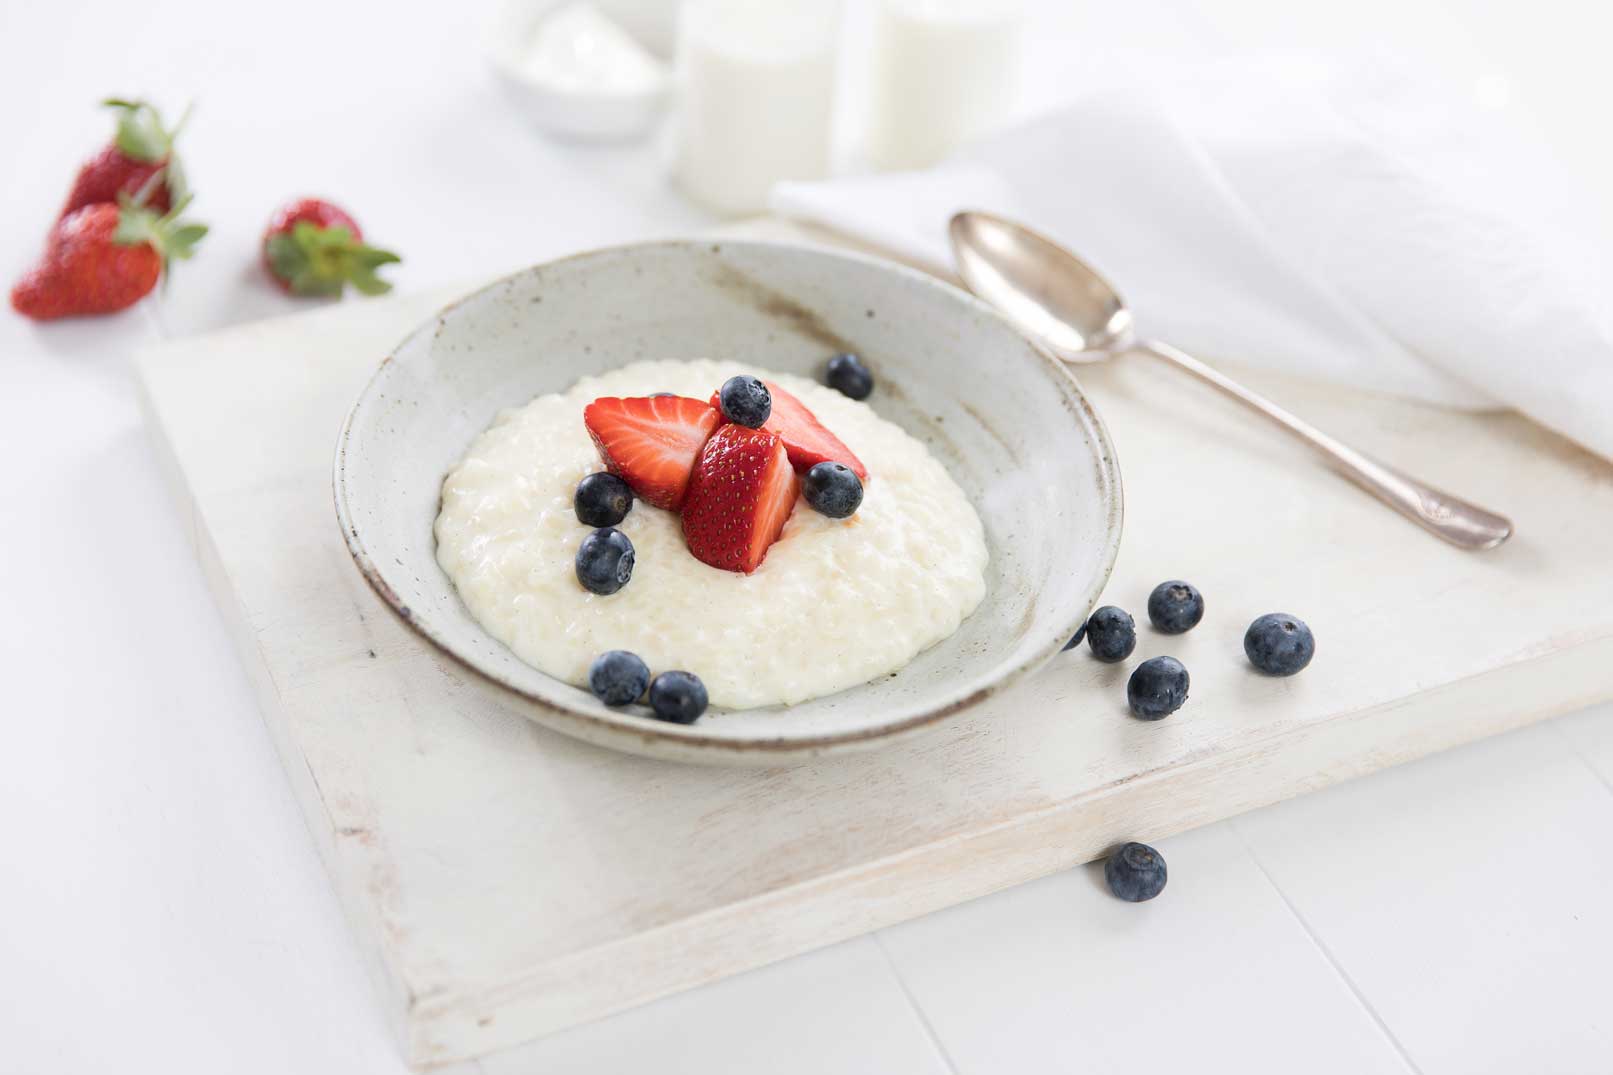 Yoghurt rice pudding topped with sliced strawberries and blueberries in a white bowl